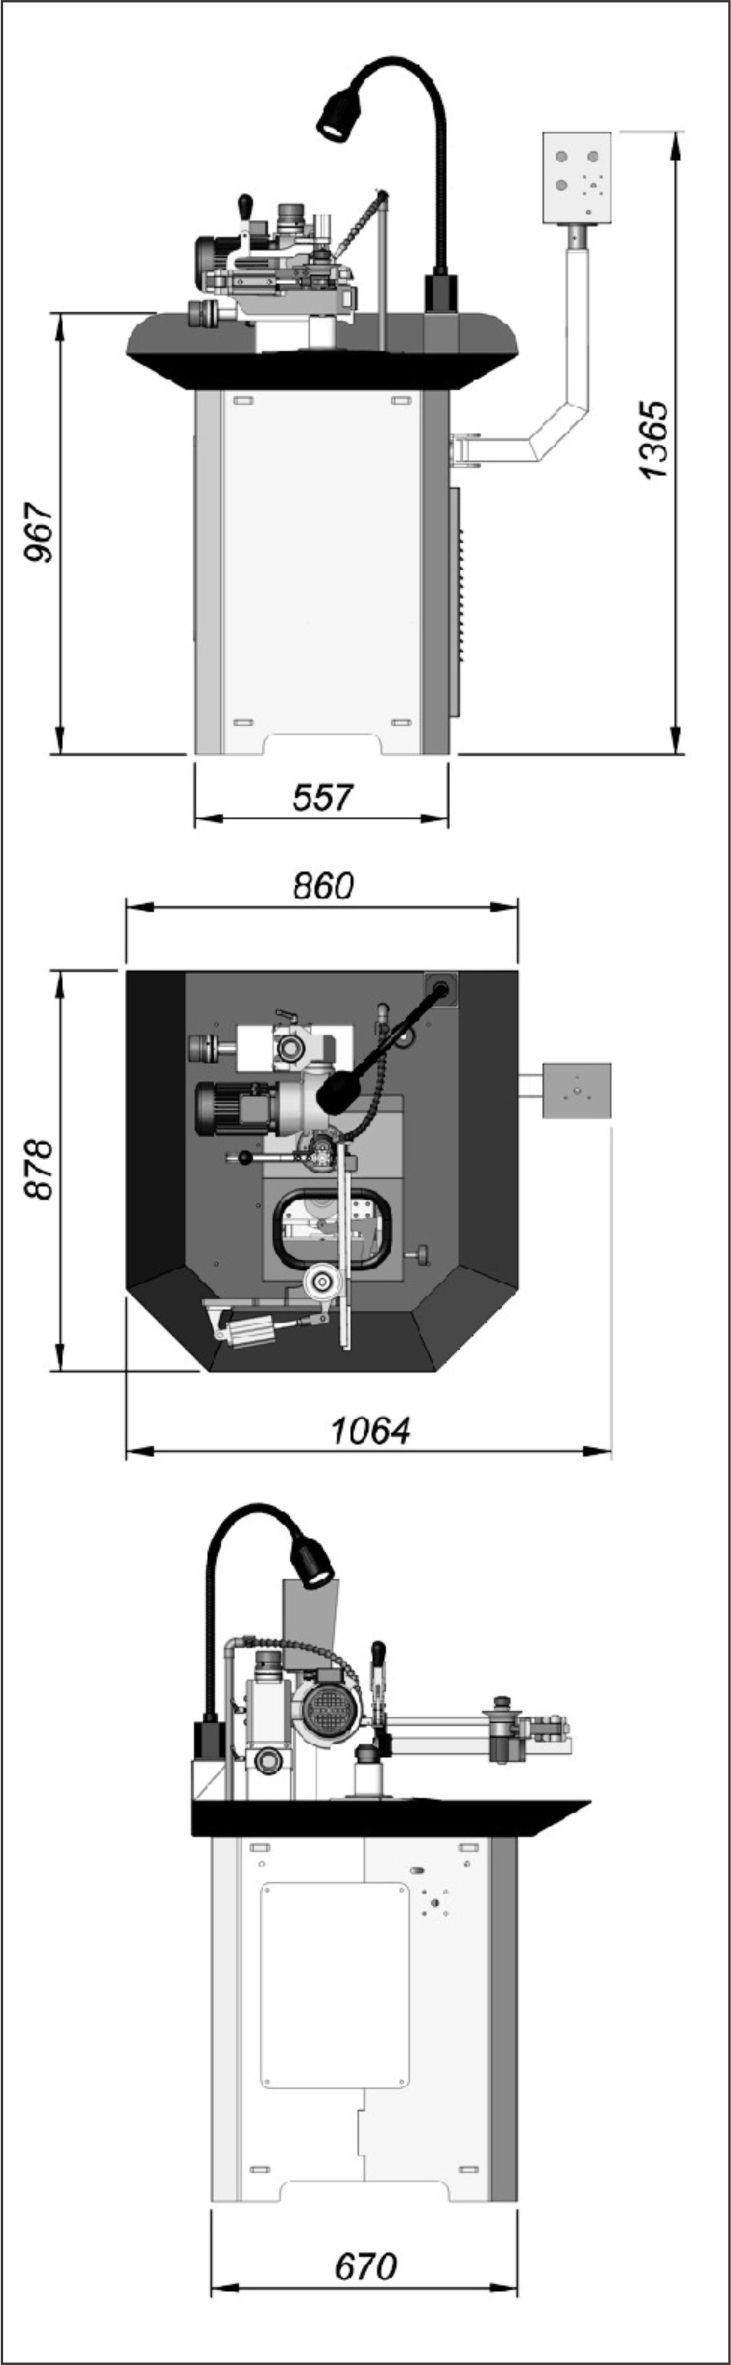 Dimensions of ASC 1 Grinding machine